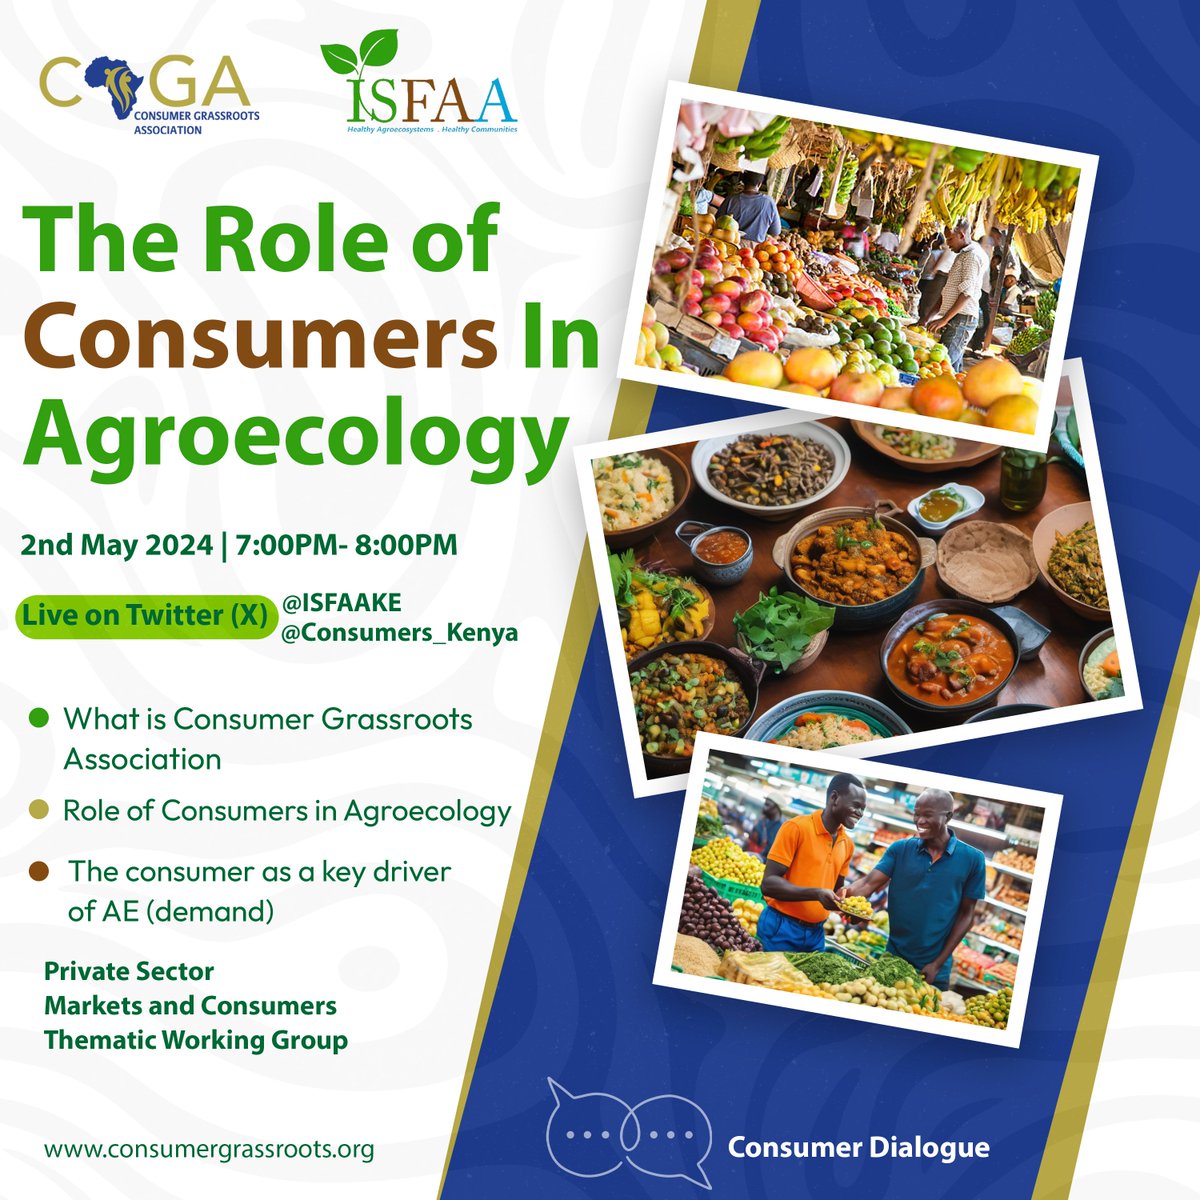 📢Happening today. We are excited to invite you to an online dialogue on 'The Role of Consumers in Agroecology'. Live on: Twitter (X) via @ISFAAKE & @Consumers_Kenya Time: 7PM to 8PM East Africa Time (GMT+3) @FutureForAll @BiovIntCIAT_eng @CIFOR_ICRAF @AgroecologyGoal